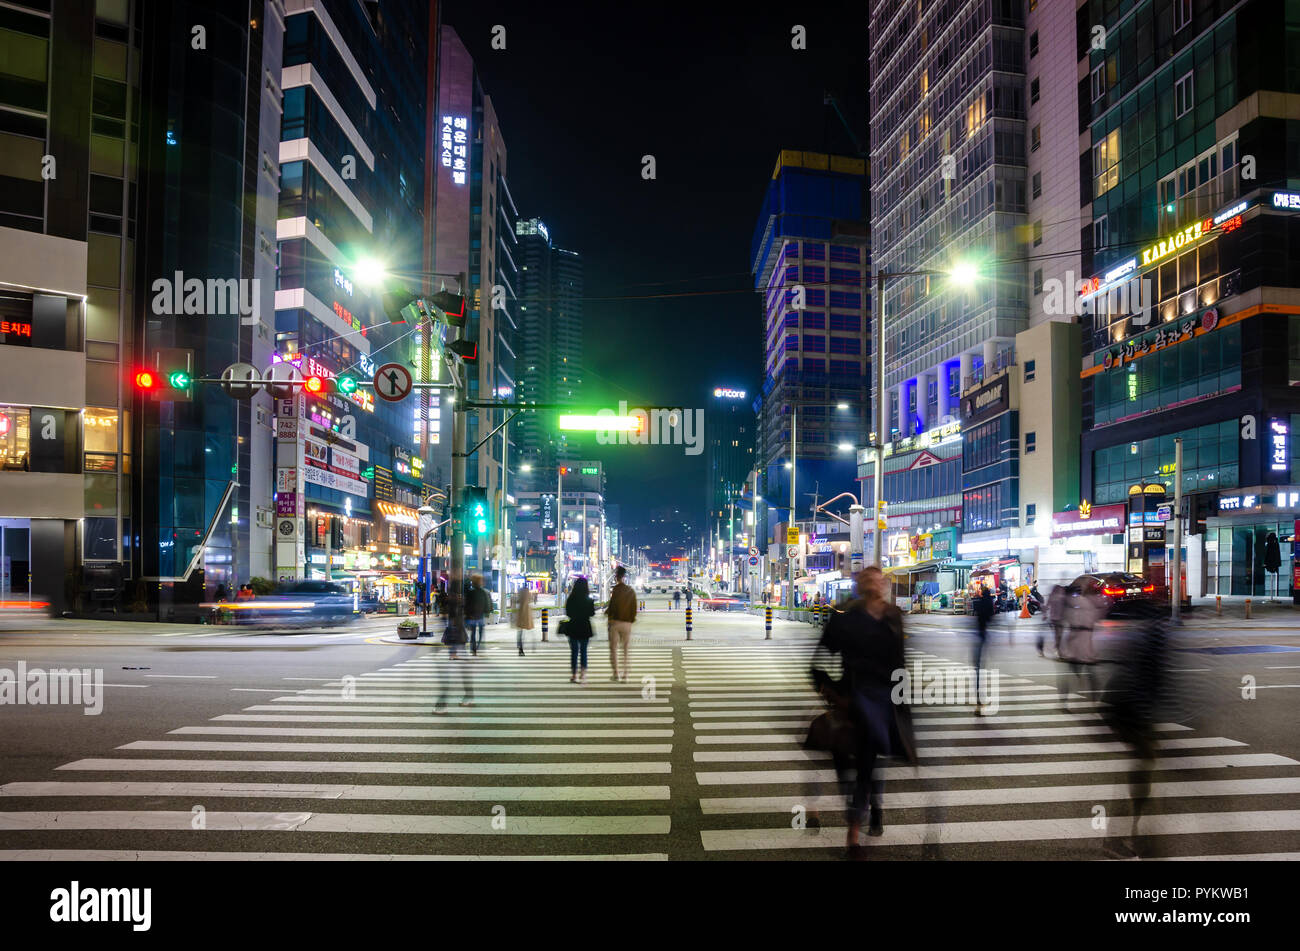 People cross a pedestrian crossing at night in Haeundae, Busan, South Korea. Behind, the street is full or bright lights shining in the dark. Stock Photo